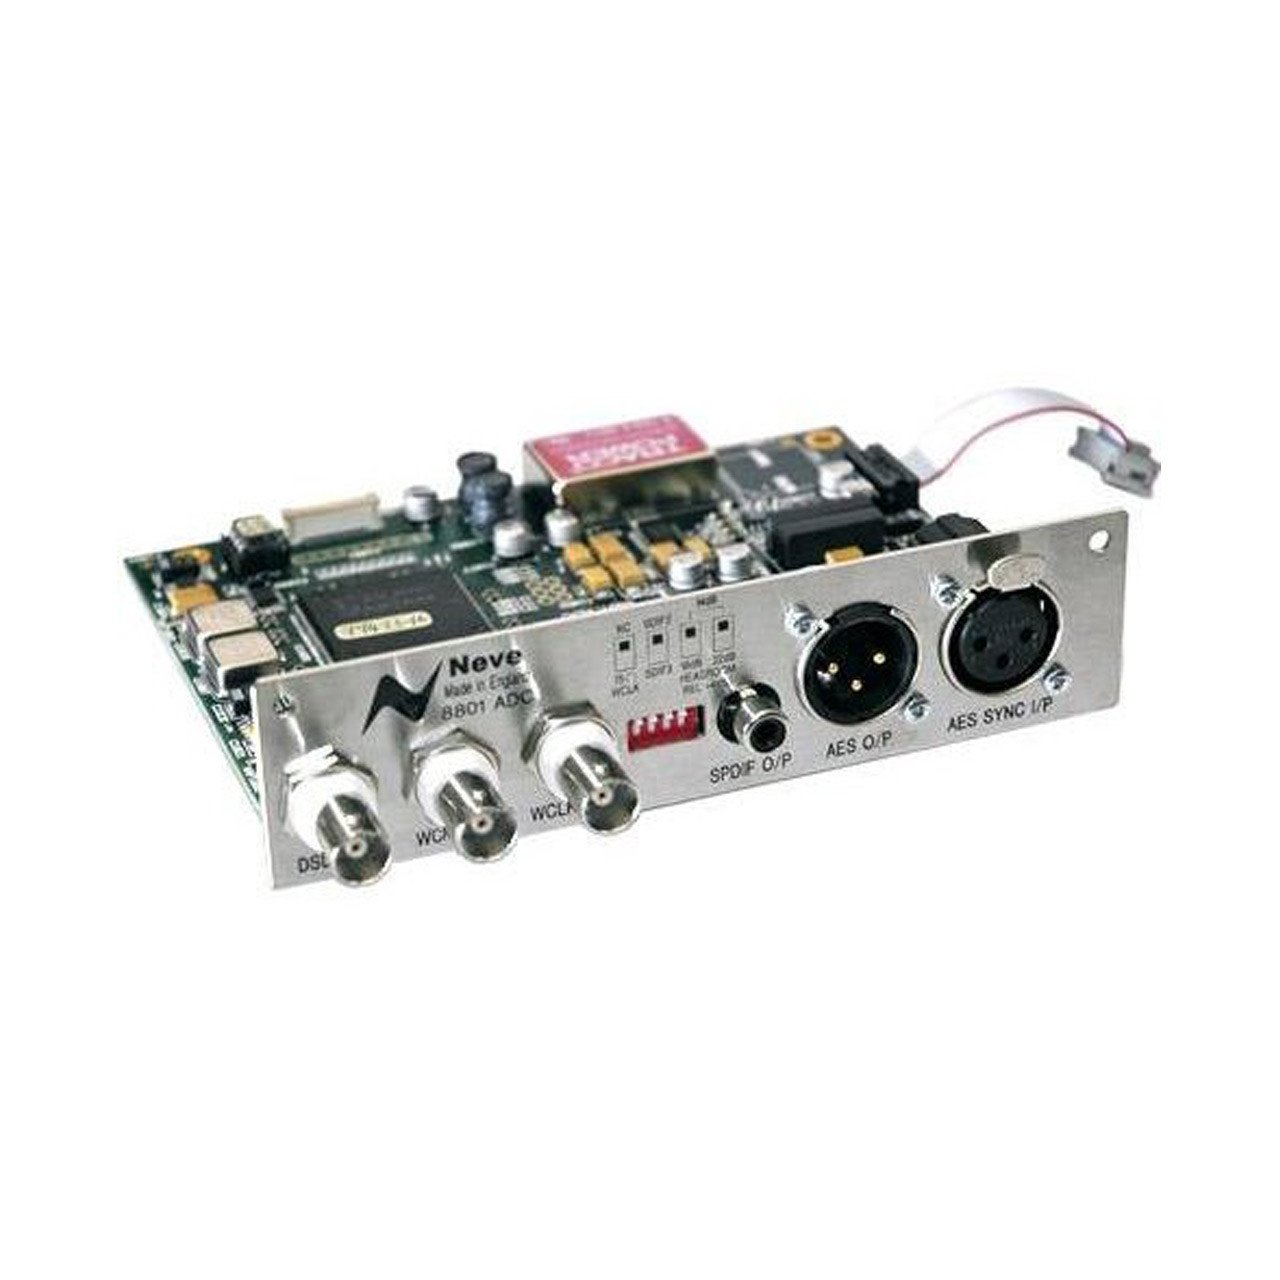 Outboard Accessories - Neve AMS 8801 ADC Expansion Card